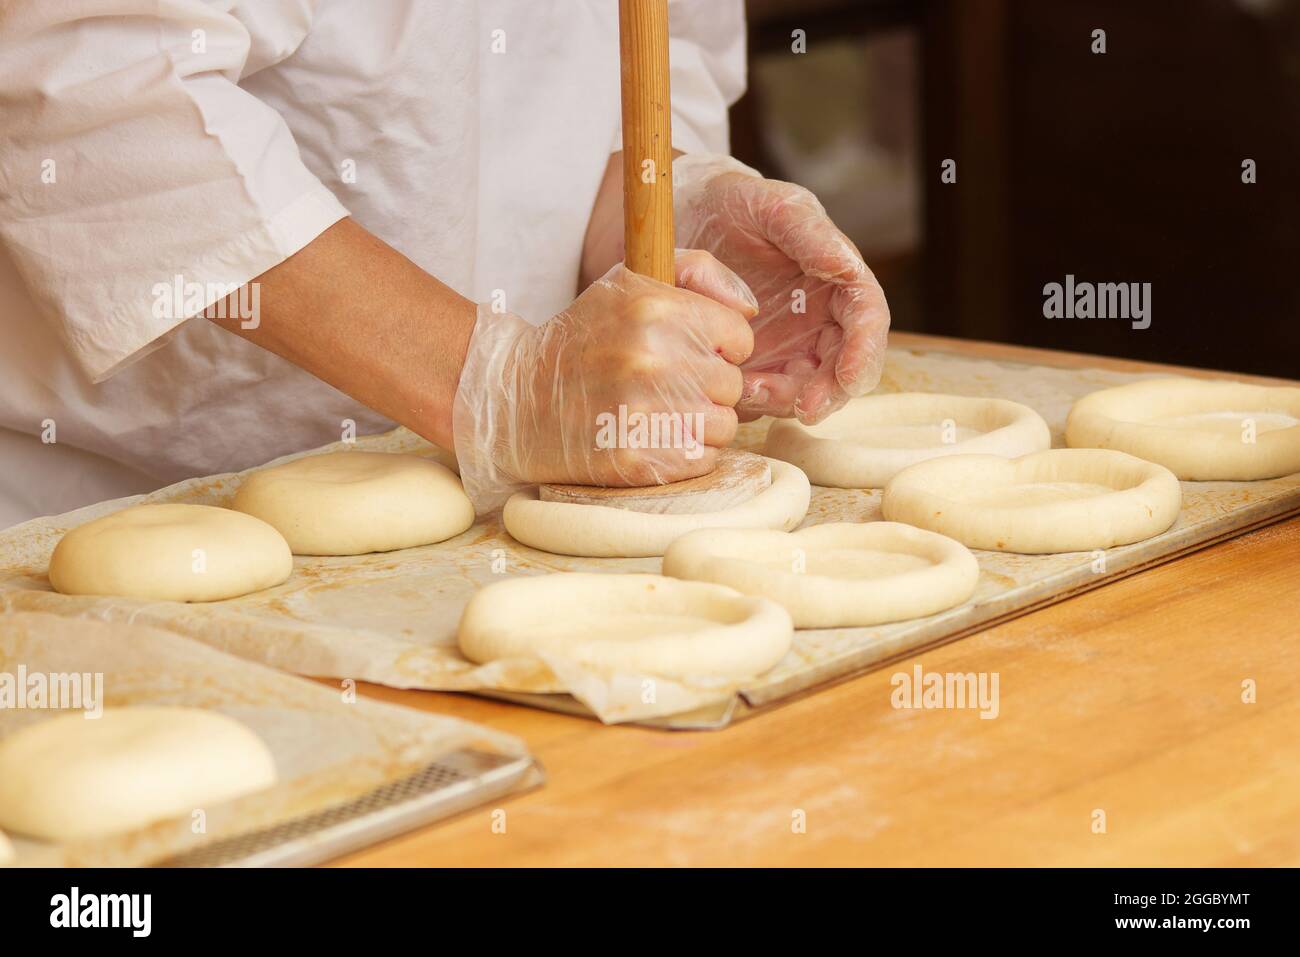 The woman in the picture is making stuffed pies. Hands in protective gloves holding the tool press dough to get the proper shape of pie. Work in the b Stock Photo